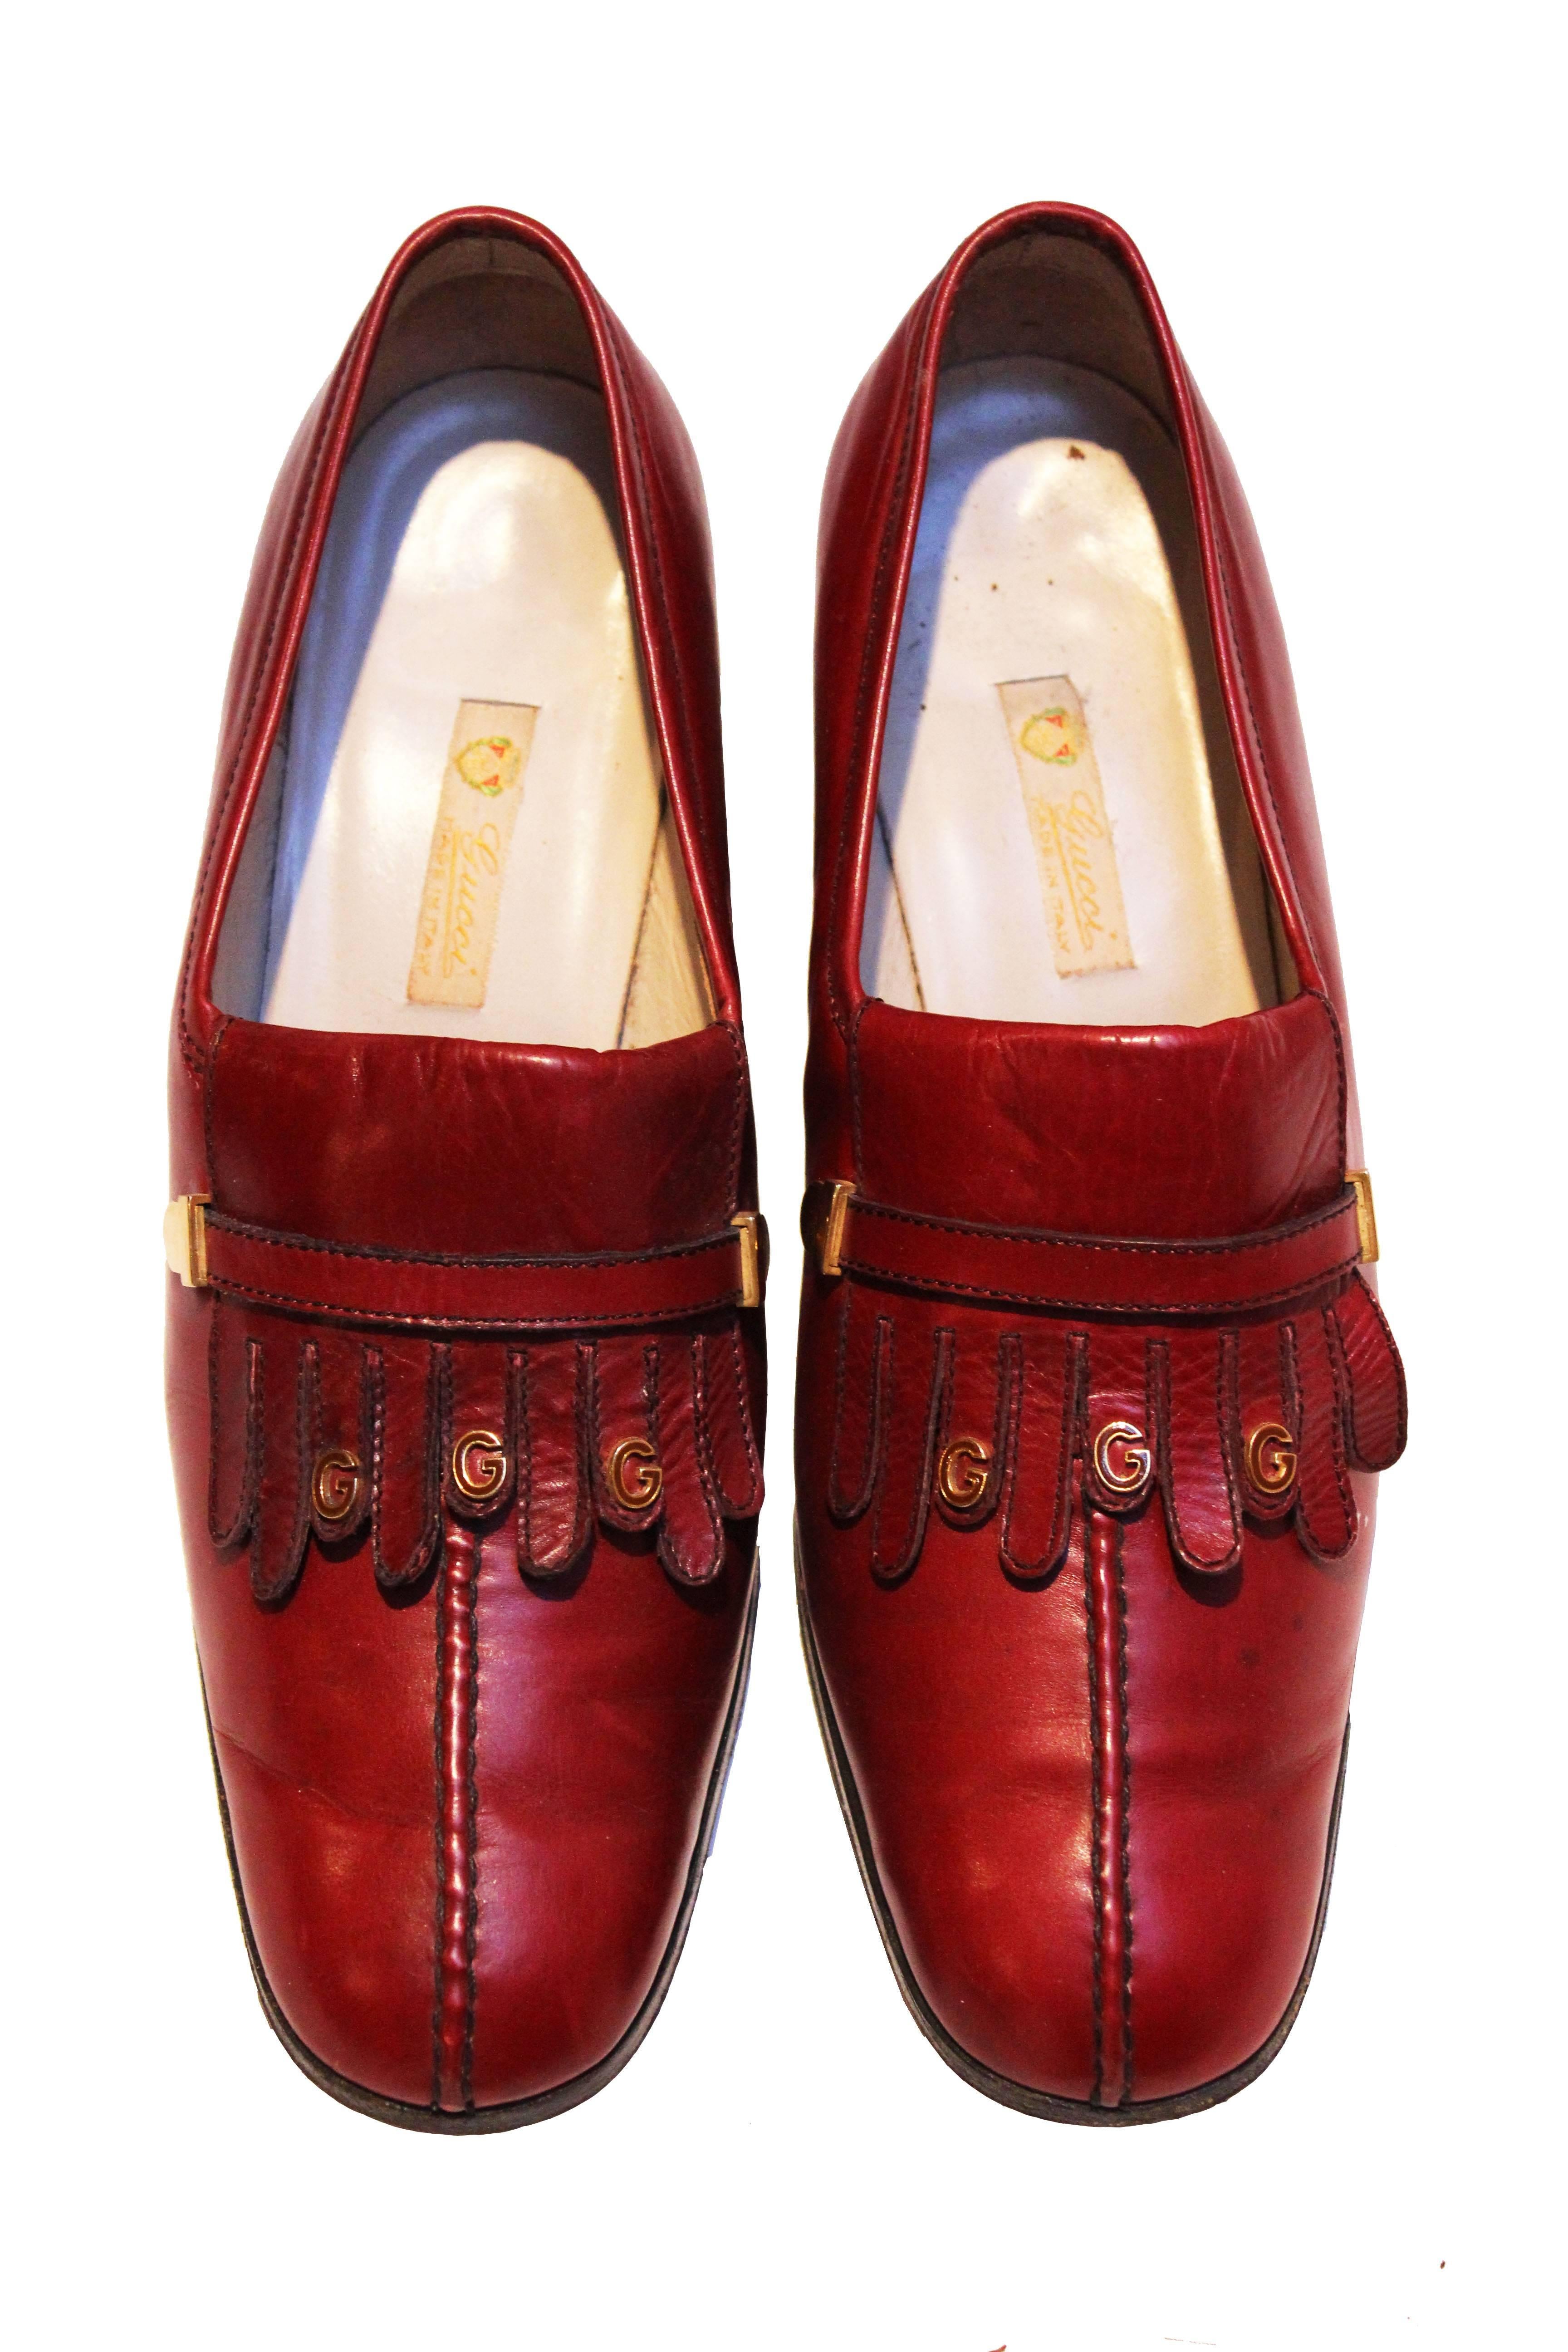 A great pair of vintage shoes by Italian house of Gucci.They are comfortable and chic with a 2 1/2 '' heel. As you would expect they are beautifully made, leather lined and leather soles. There is a lovely fringe feature on the front , with the G